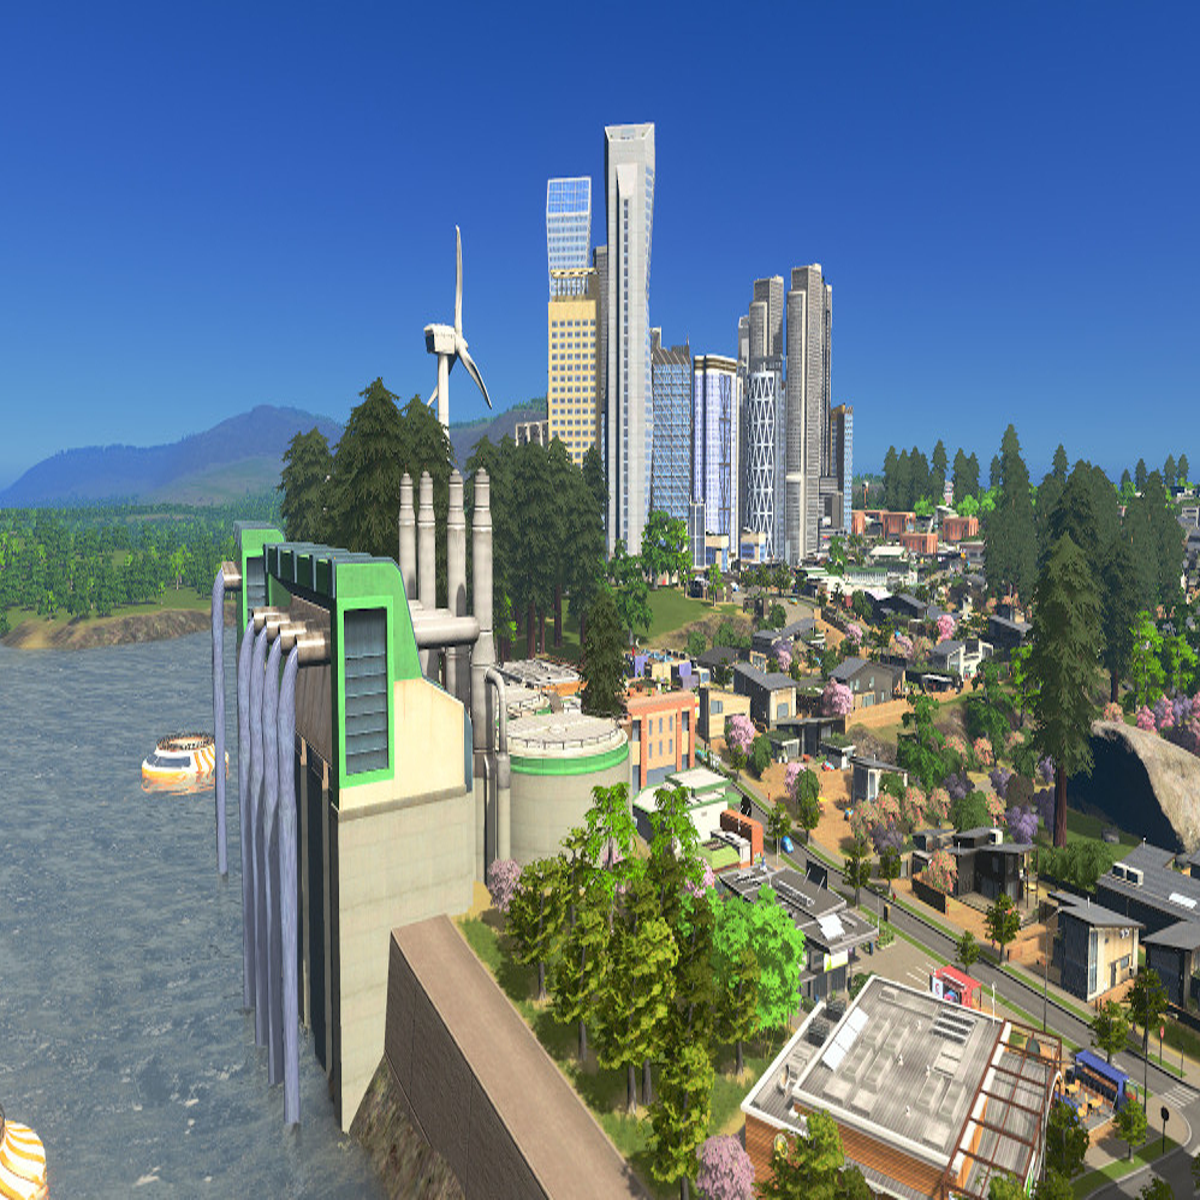 Paradox Mods in Cities Skylines 2 